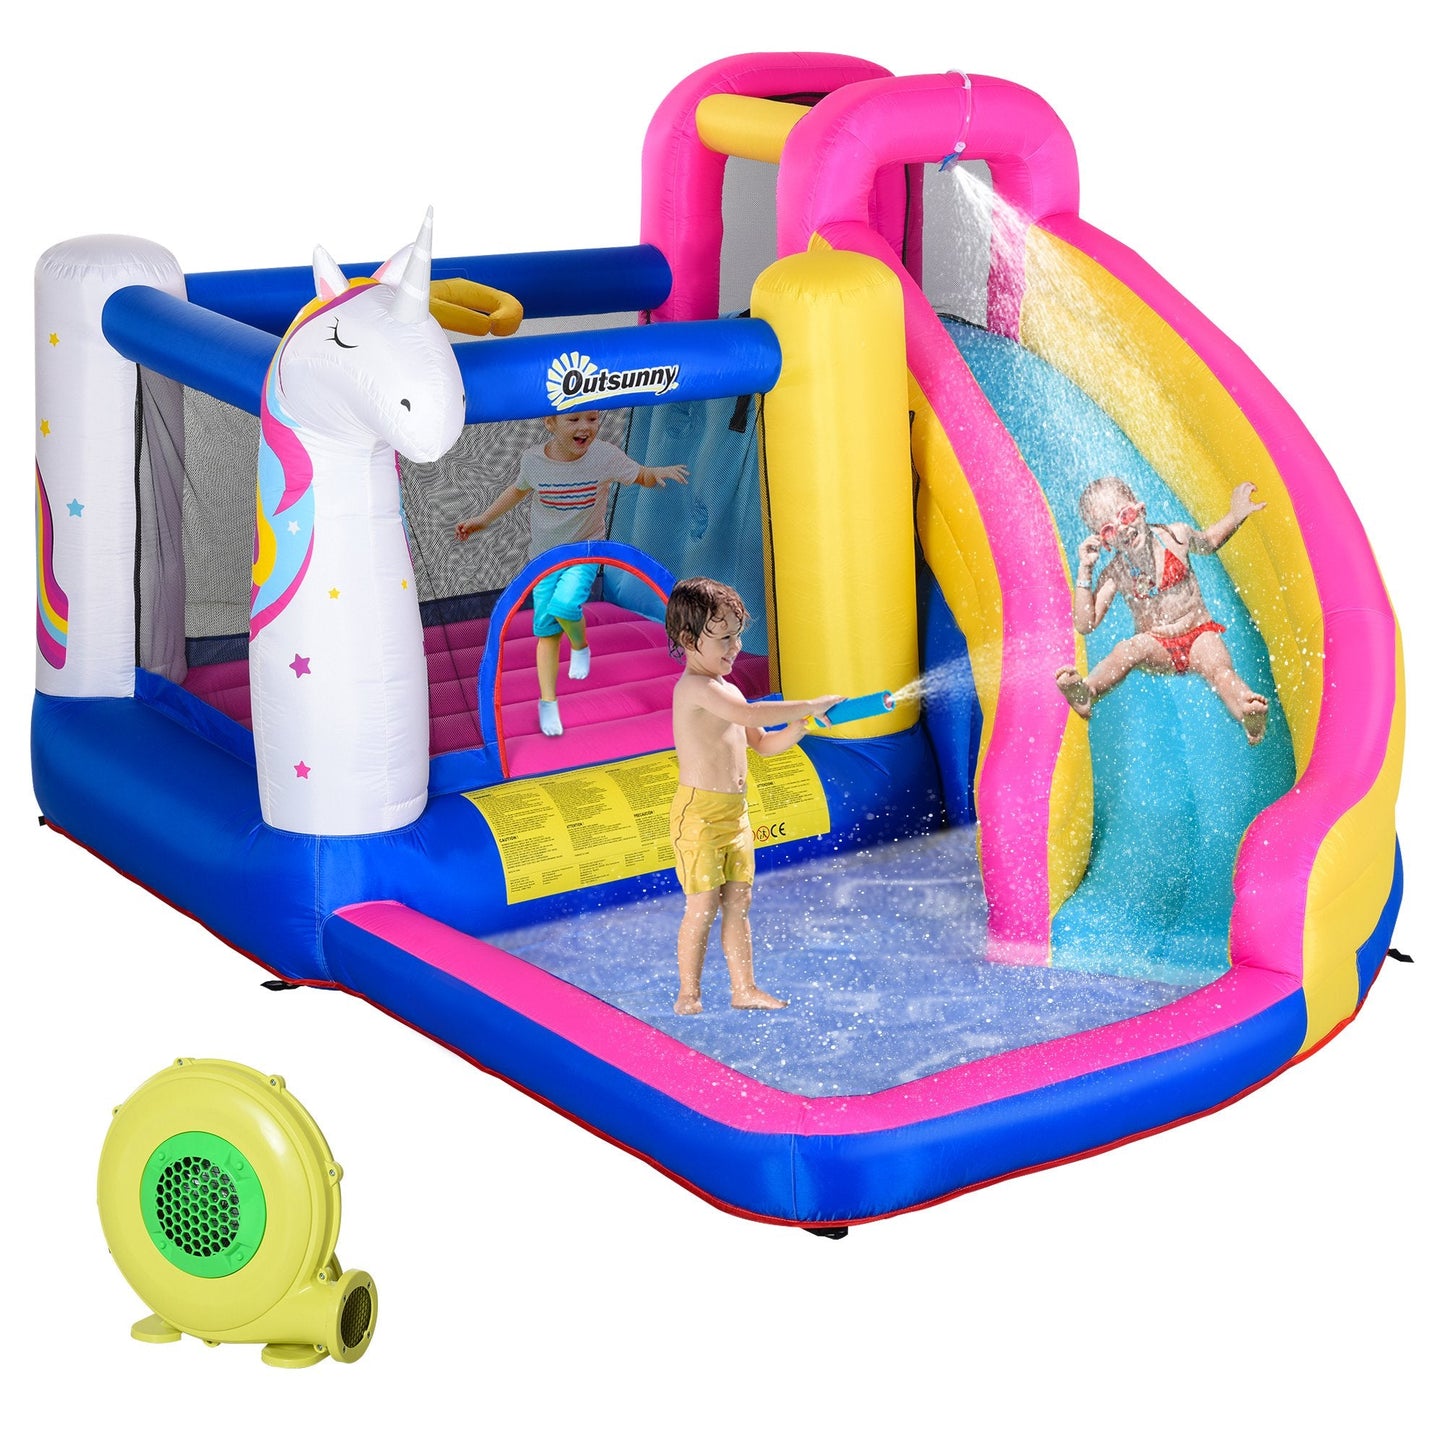 Miscellaneous-5 in 1 Inflatable Bounce House Trampoline with Pool, Climbing Wall for Kids Age 3-10 with Air Blower - Outdoor Style Company